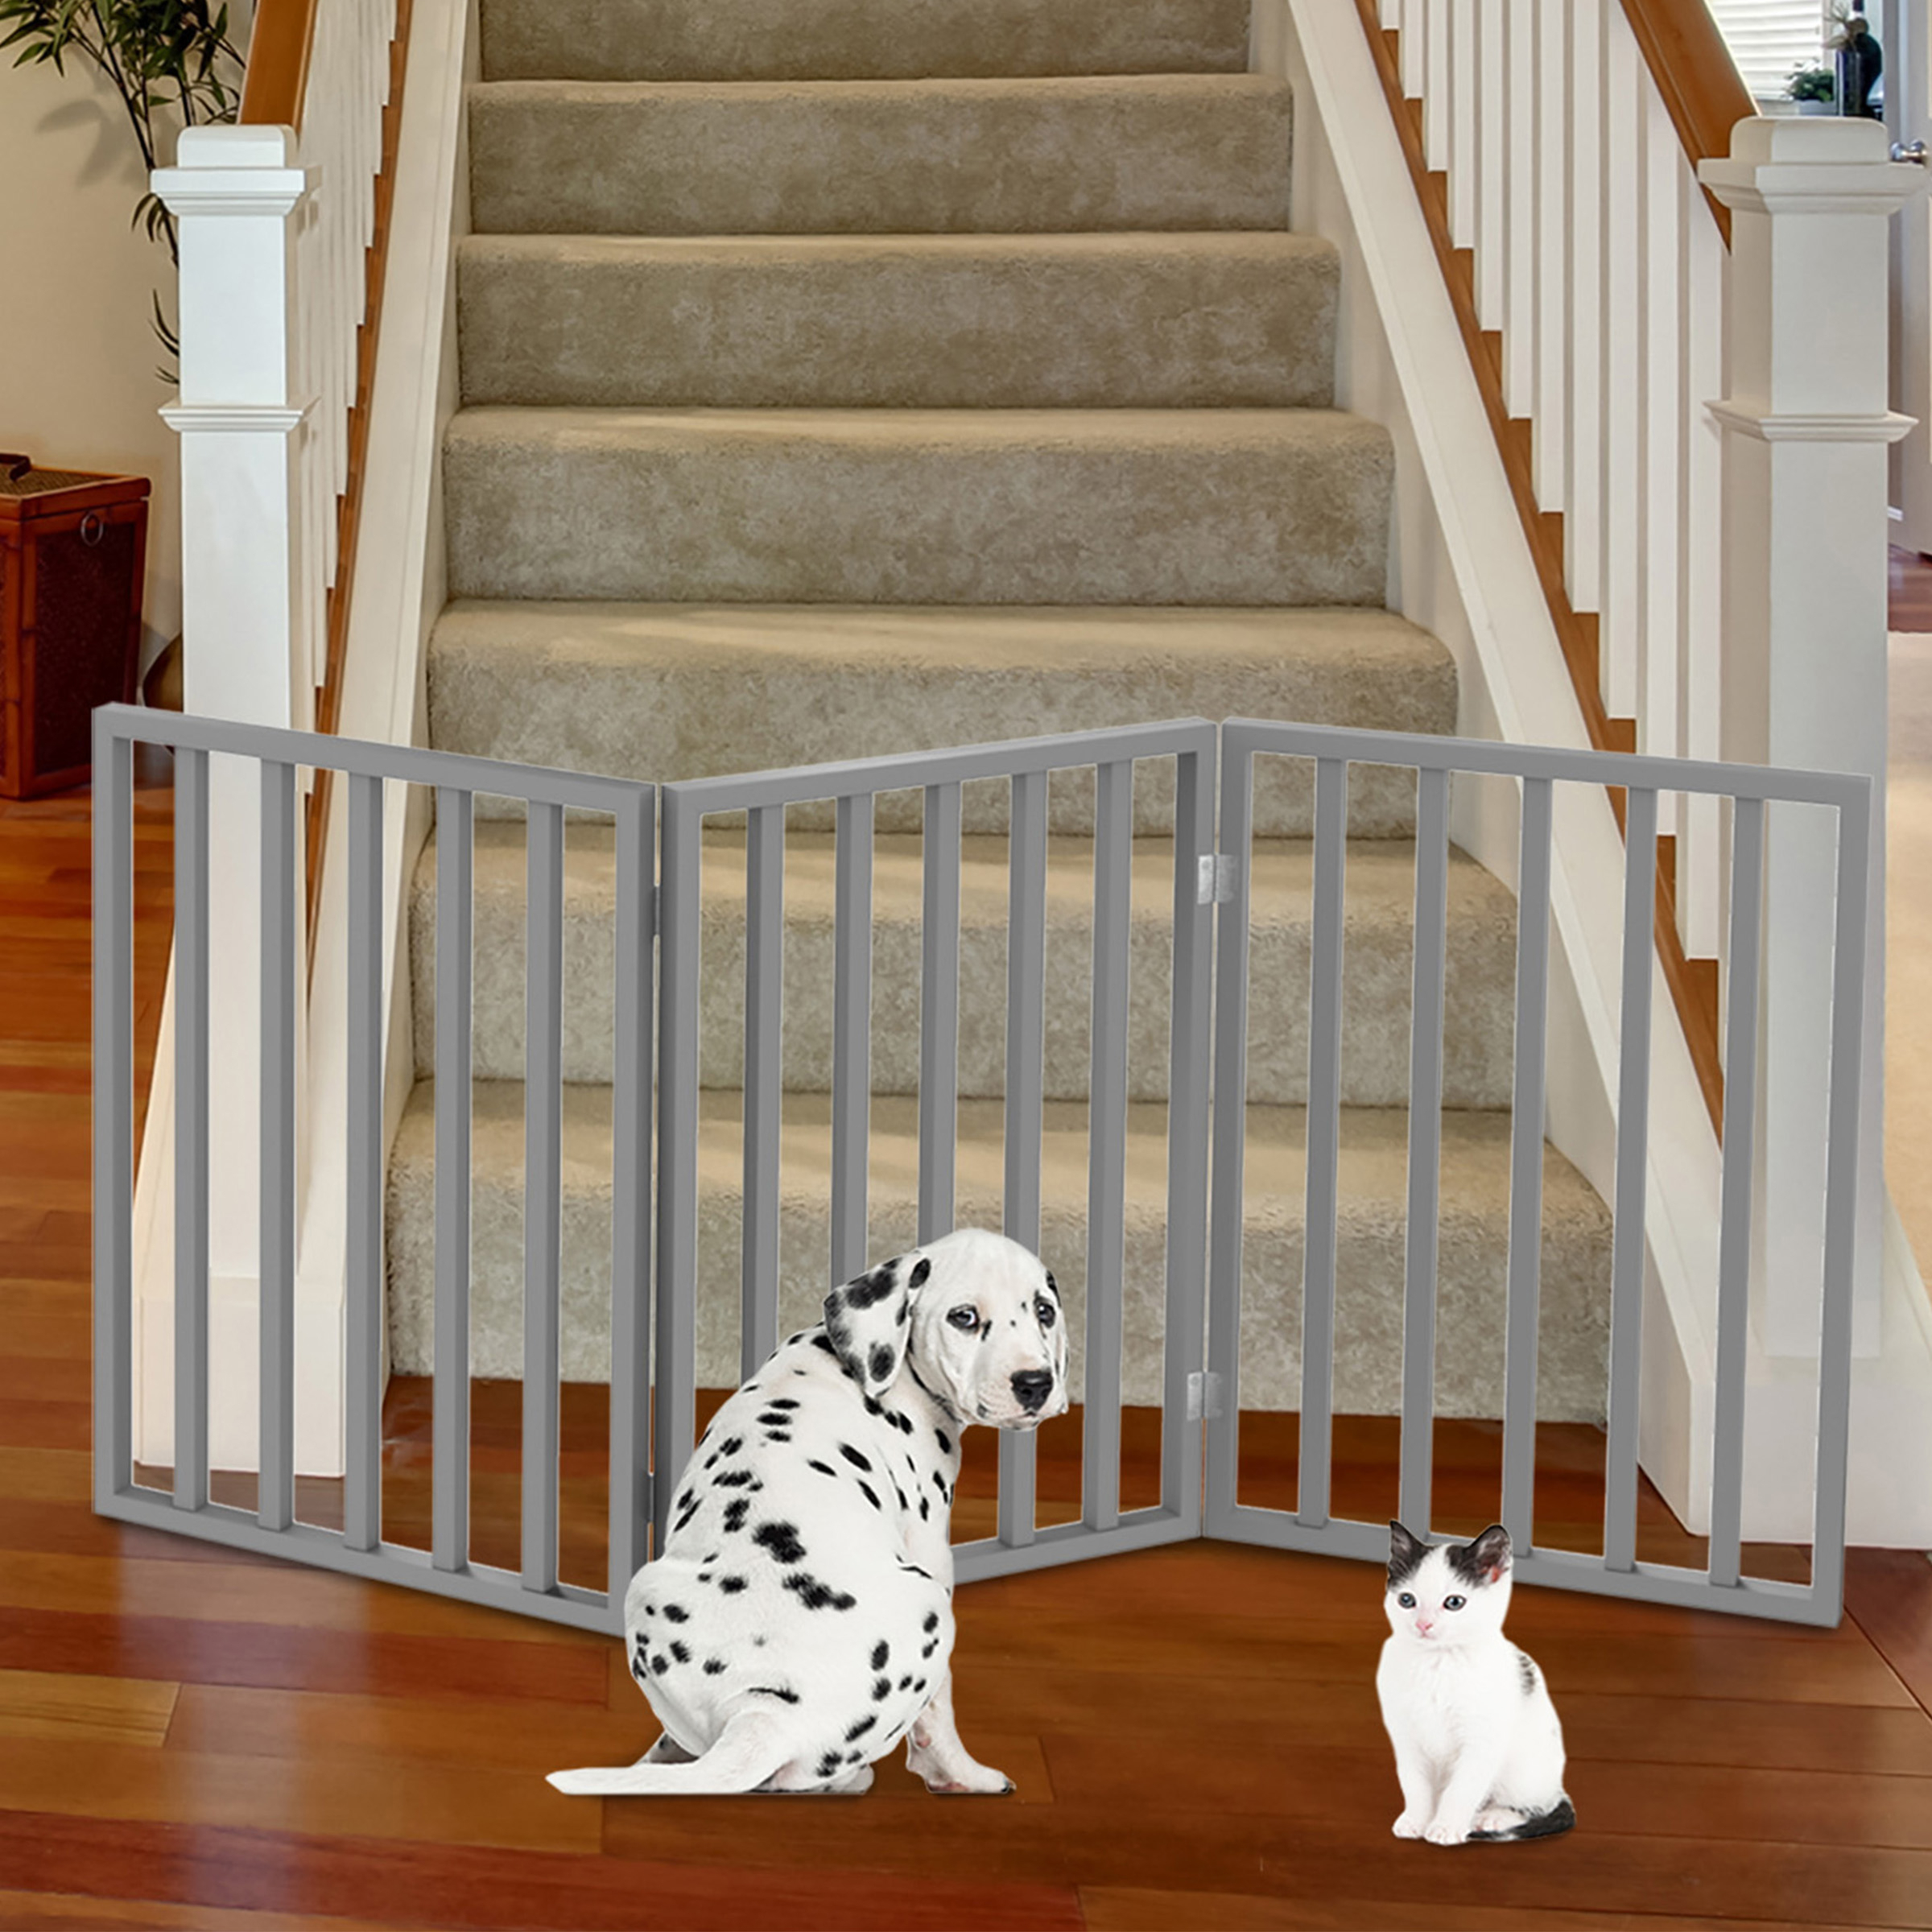 Wooden Pet Gate- Foldable 3-Panel Indoor Barrier Fence, Freestanding And Lightweight